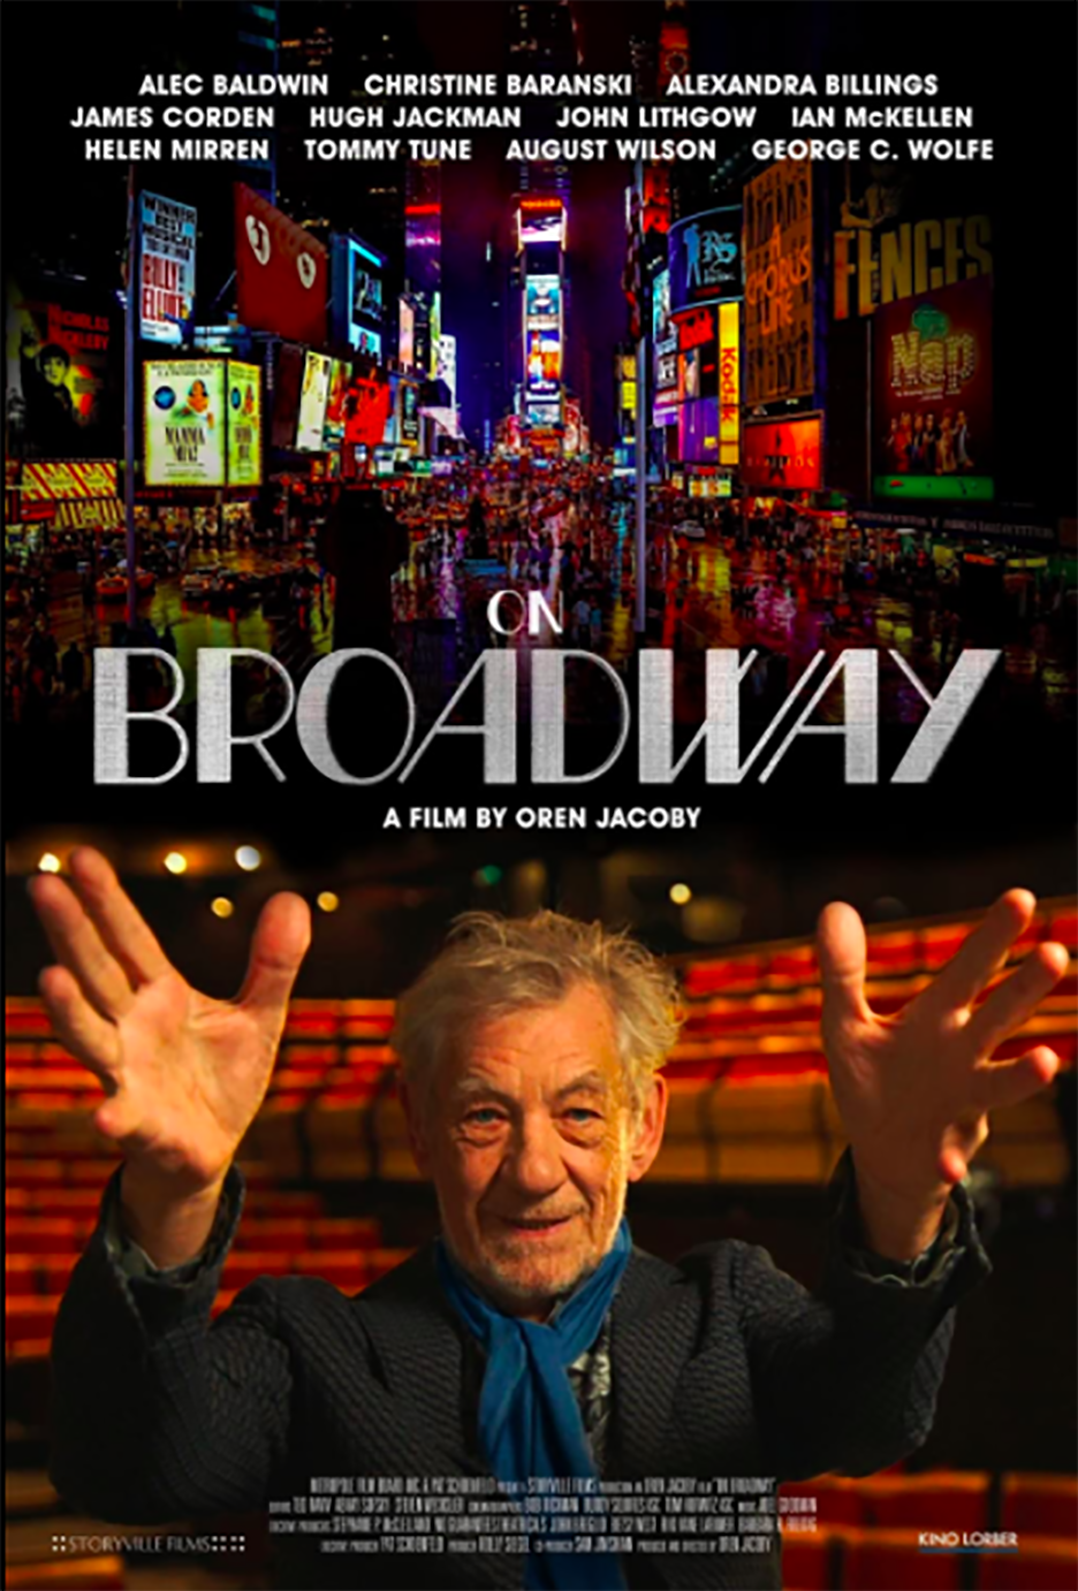 ‘On Broadway’ is a hit